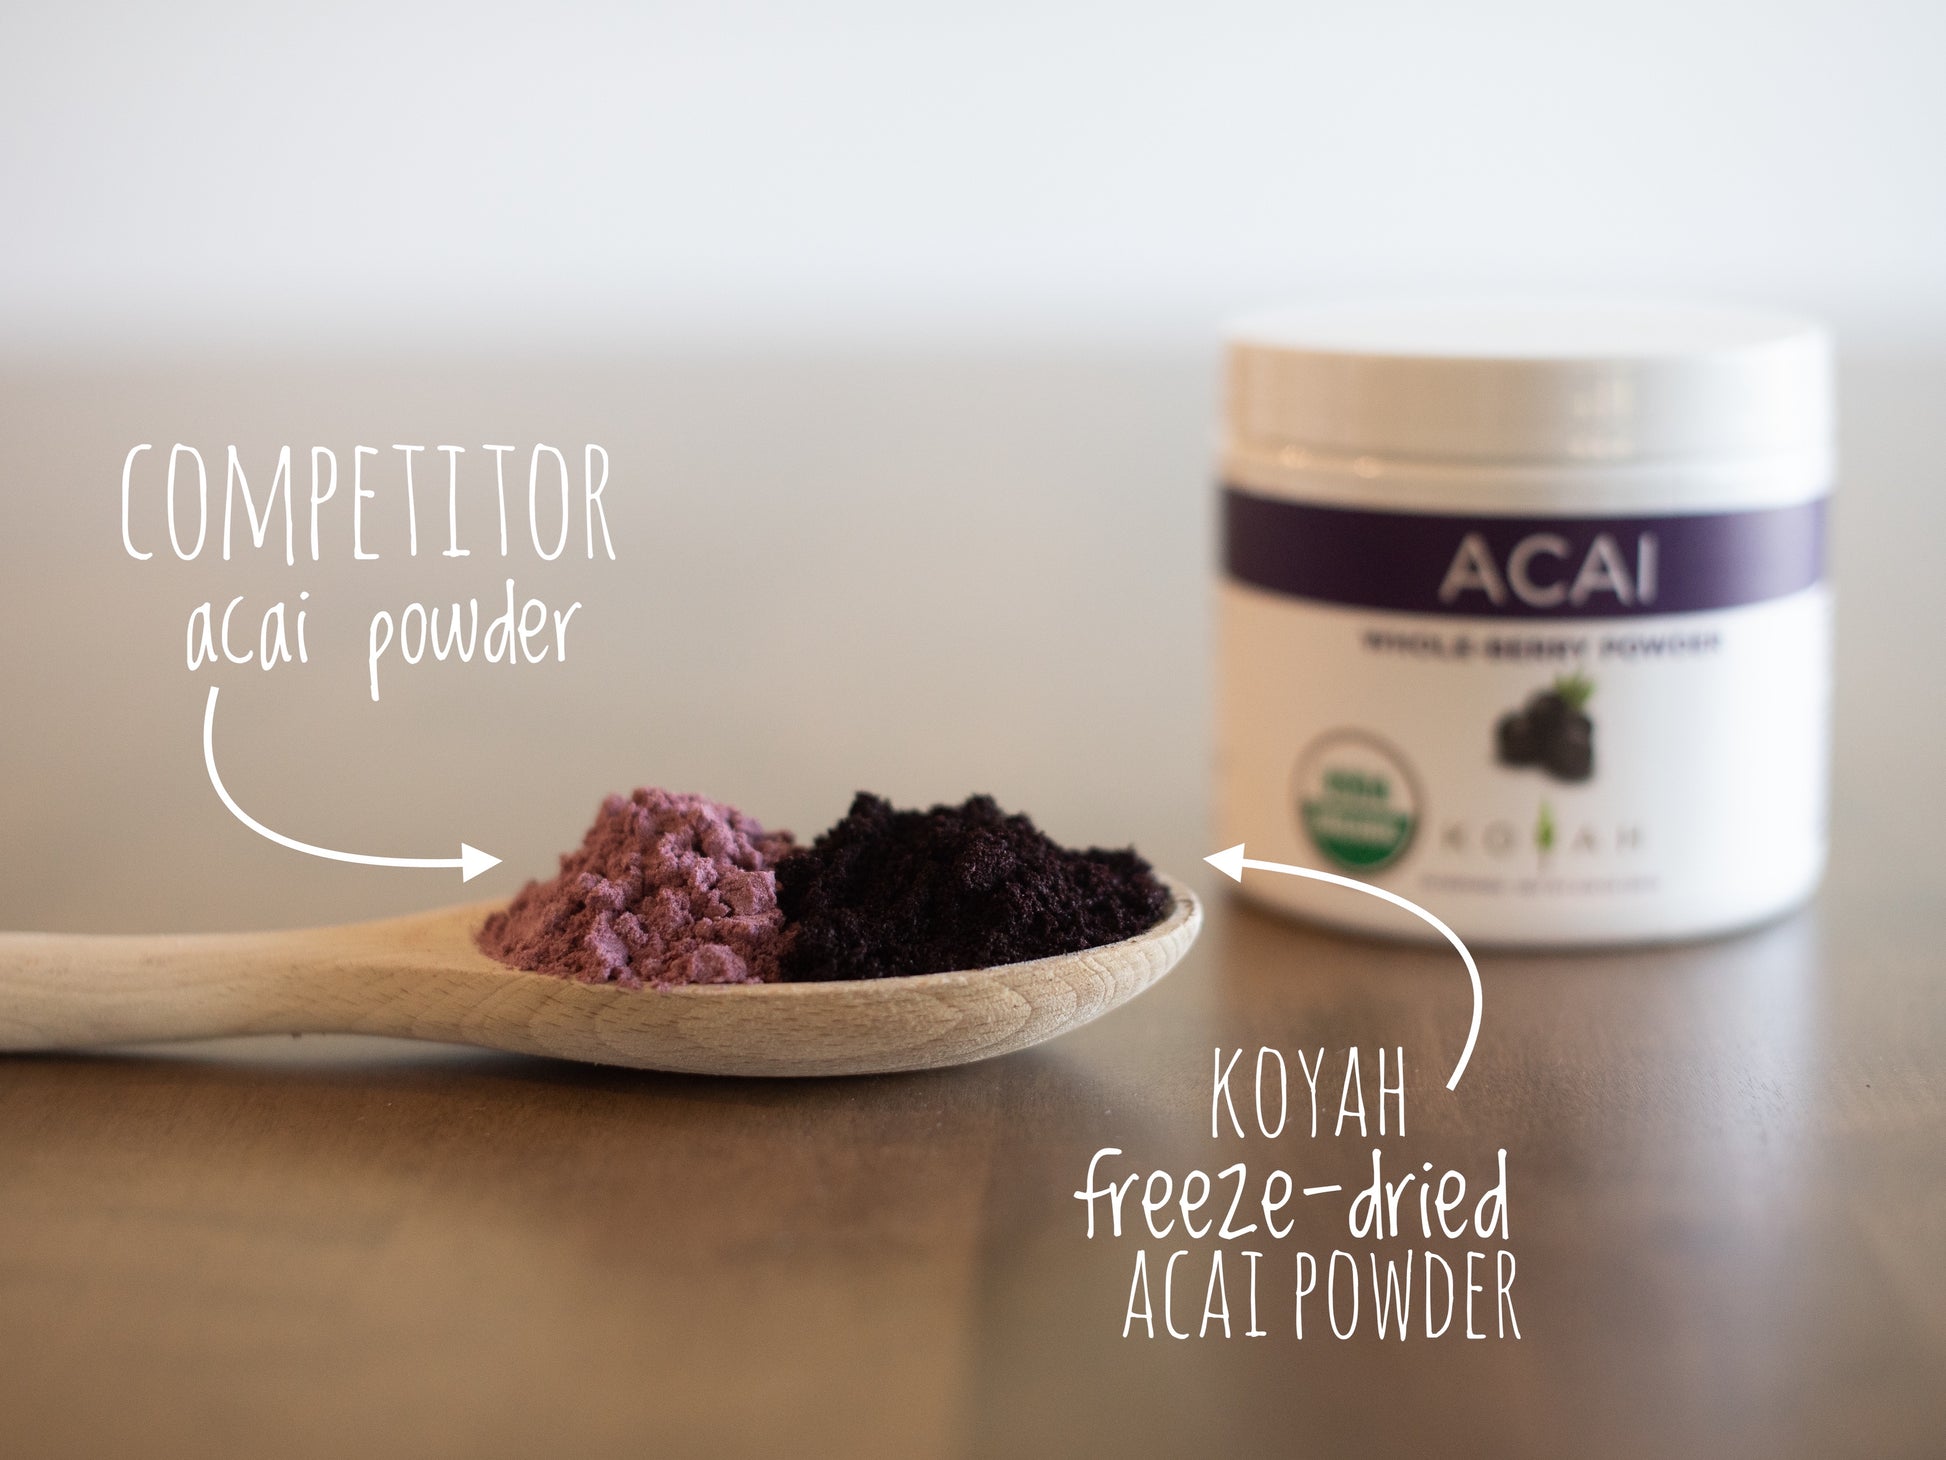 Other acai powders are a light pink color because they have filler ingredients. Our acai powder is a natural dark purple, almost black, color because there are not filler ingredients.